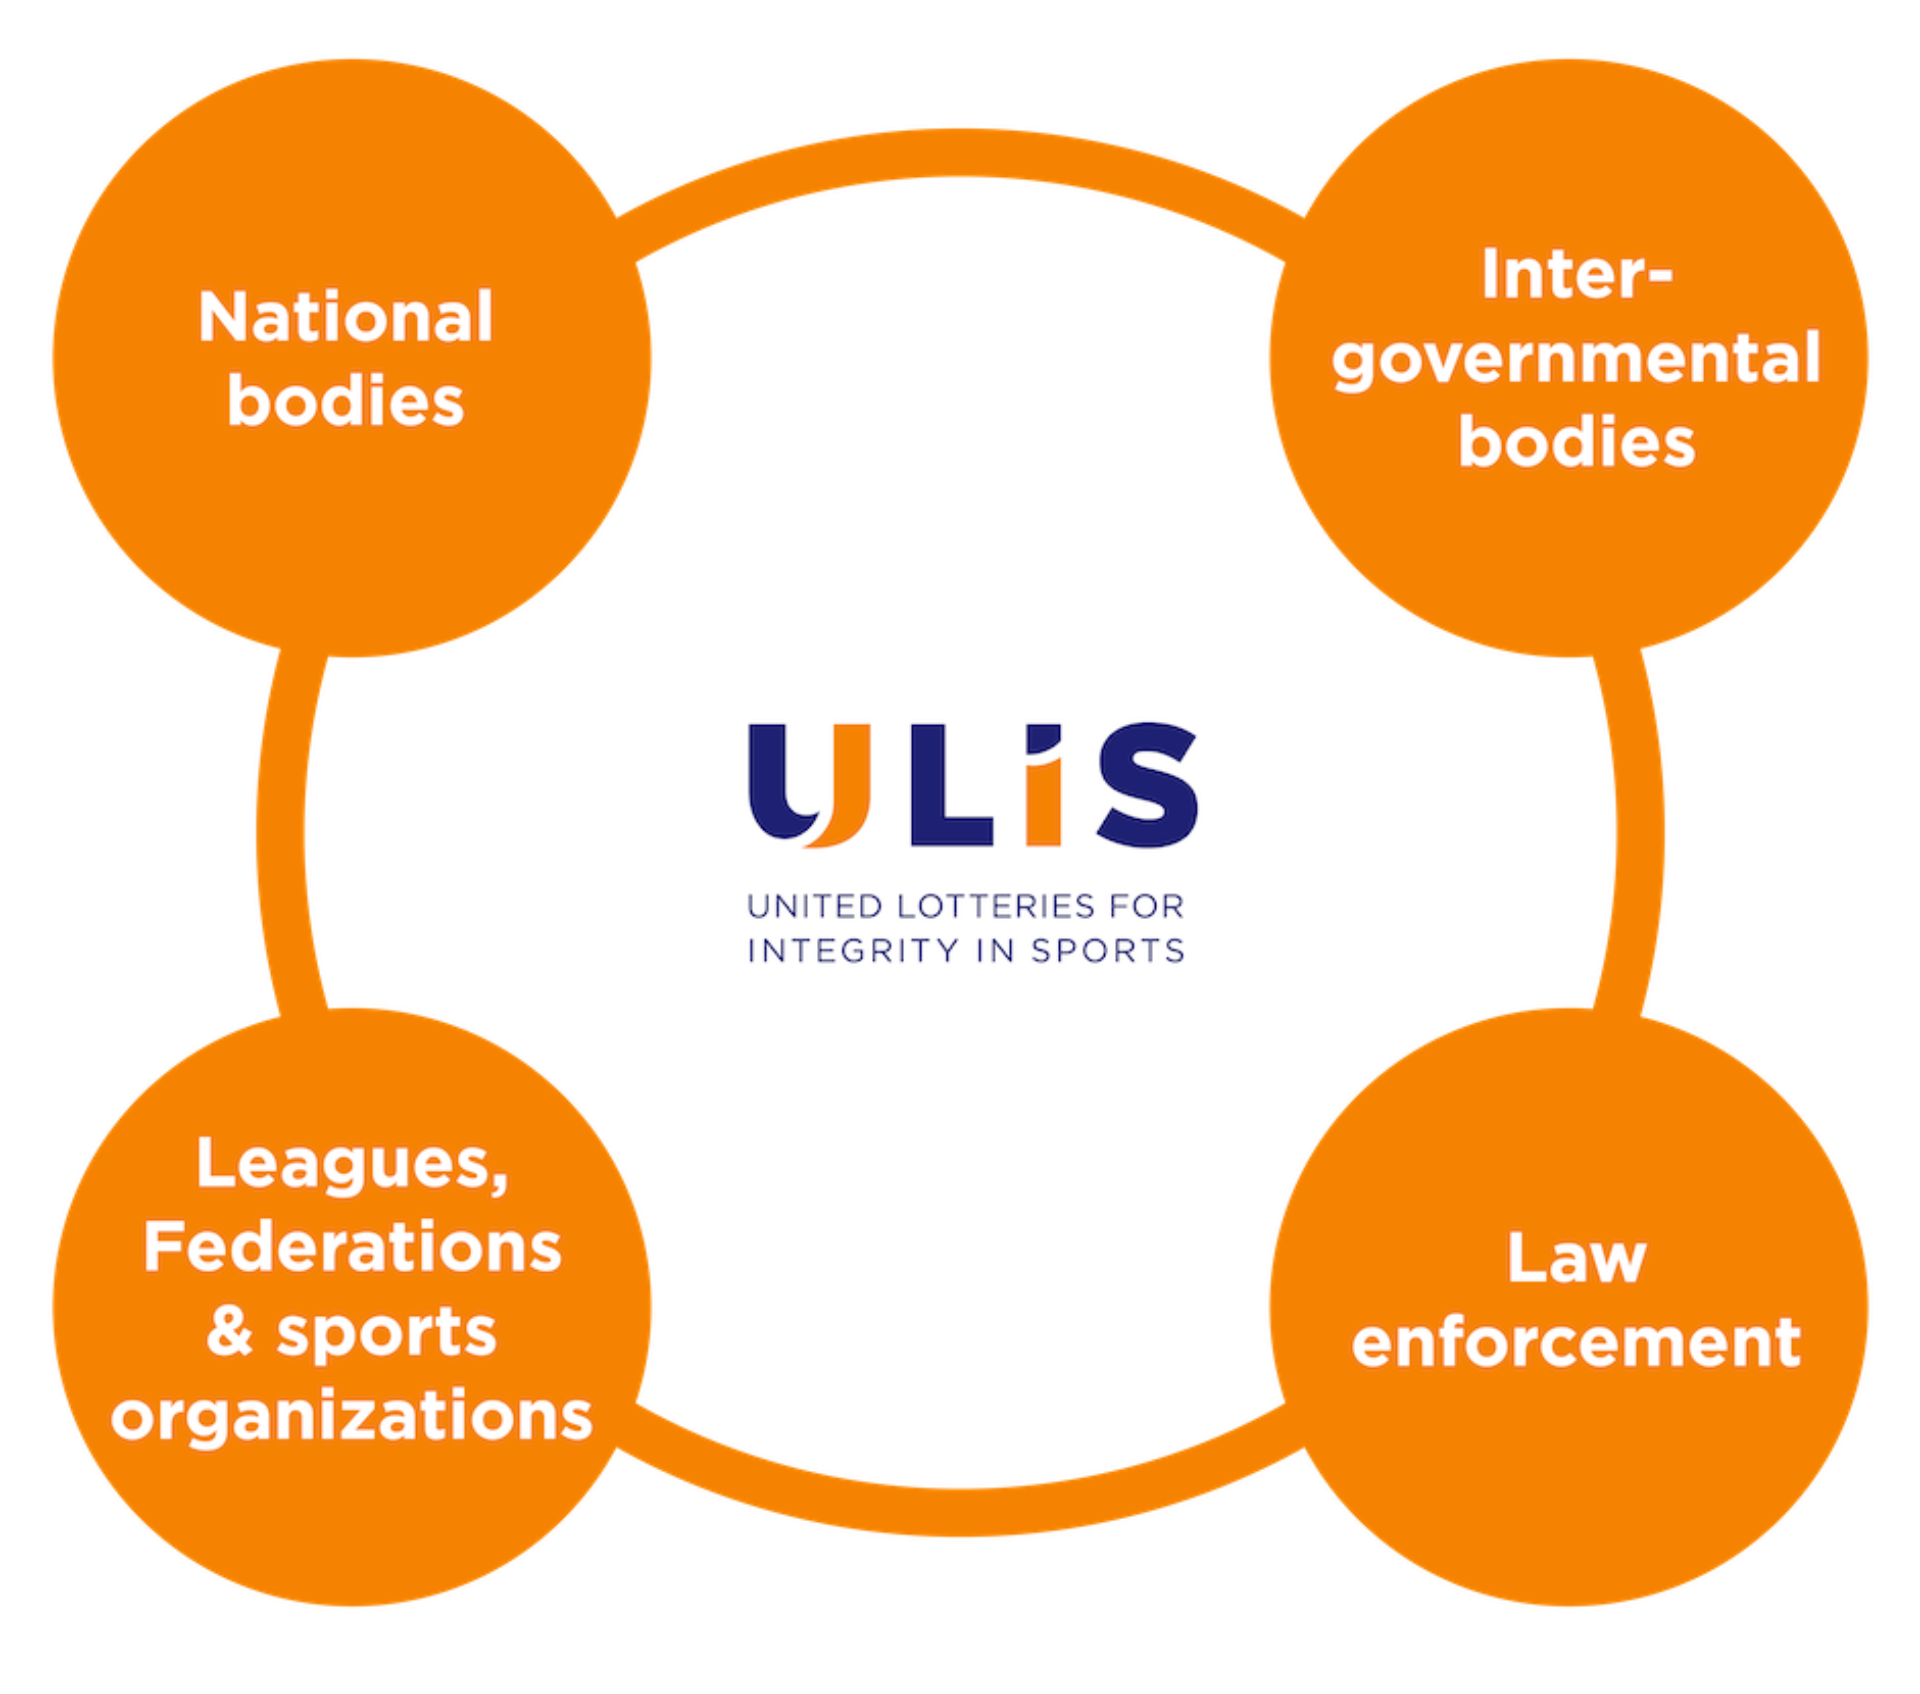 A global multi stakeholder network ULIS infographic